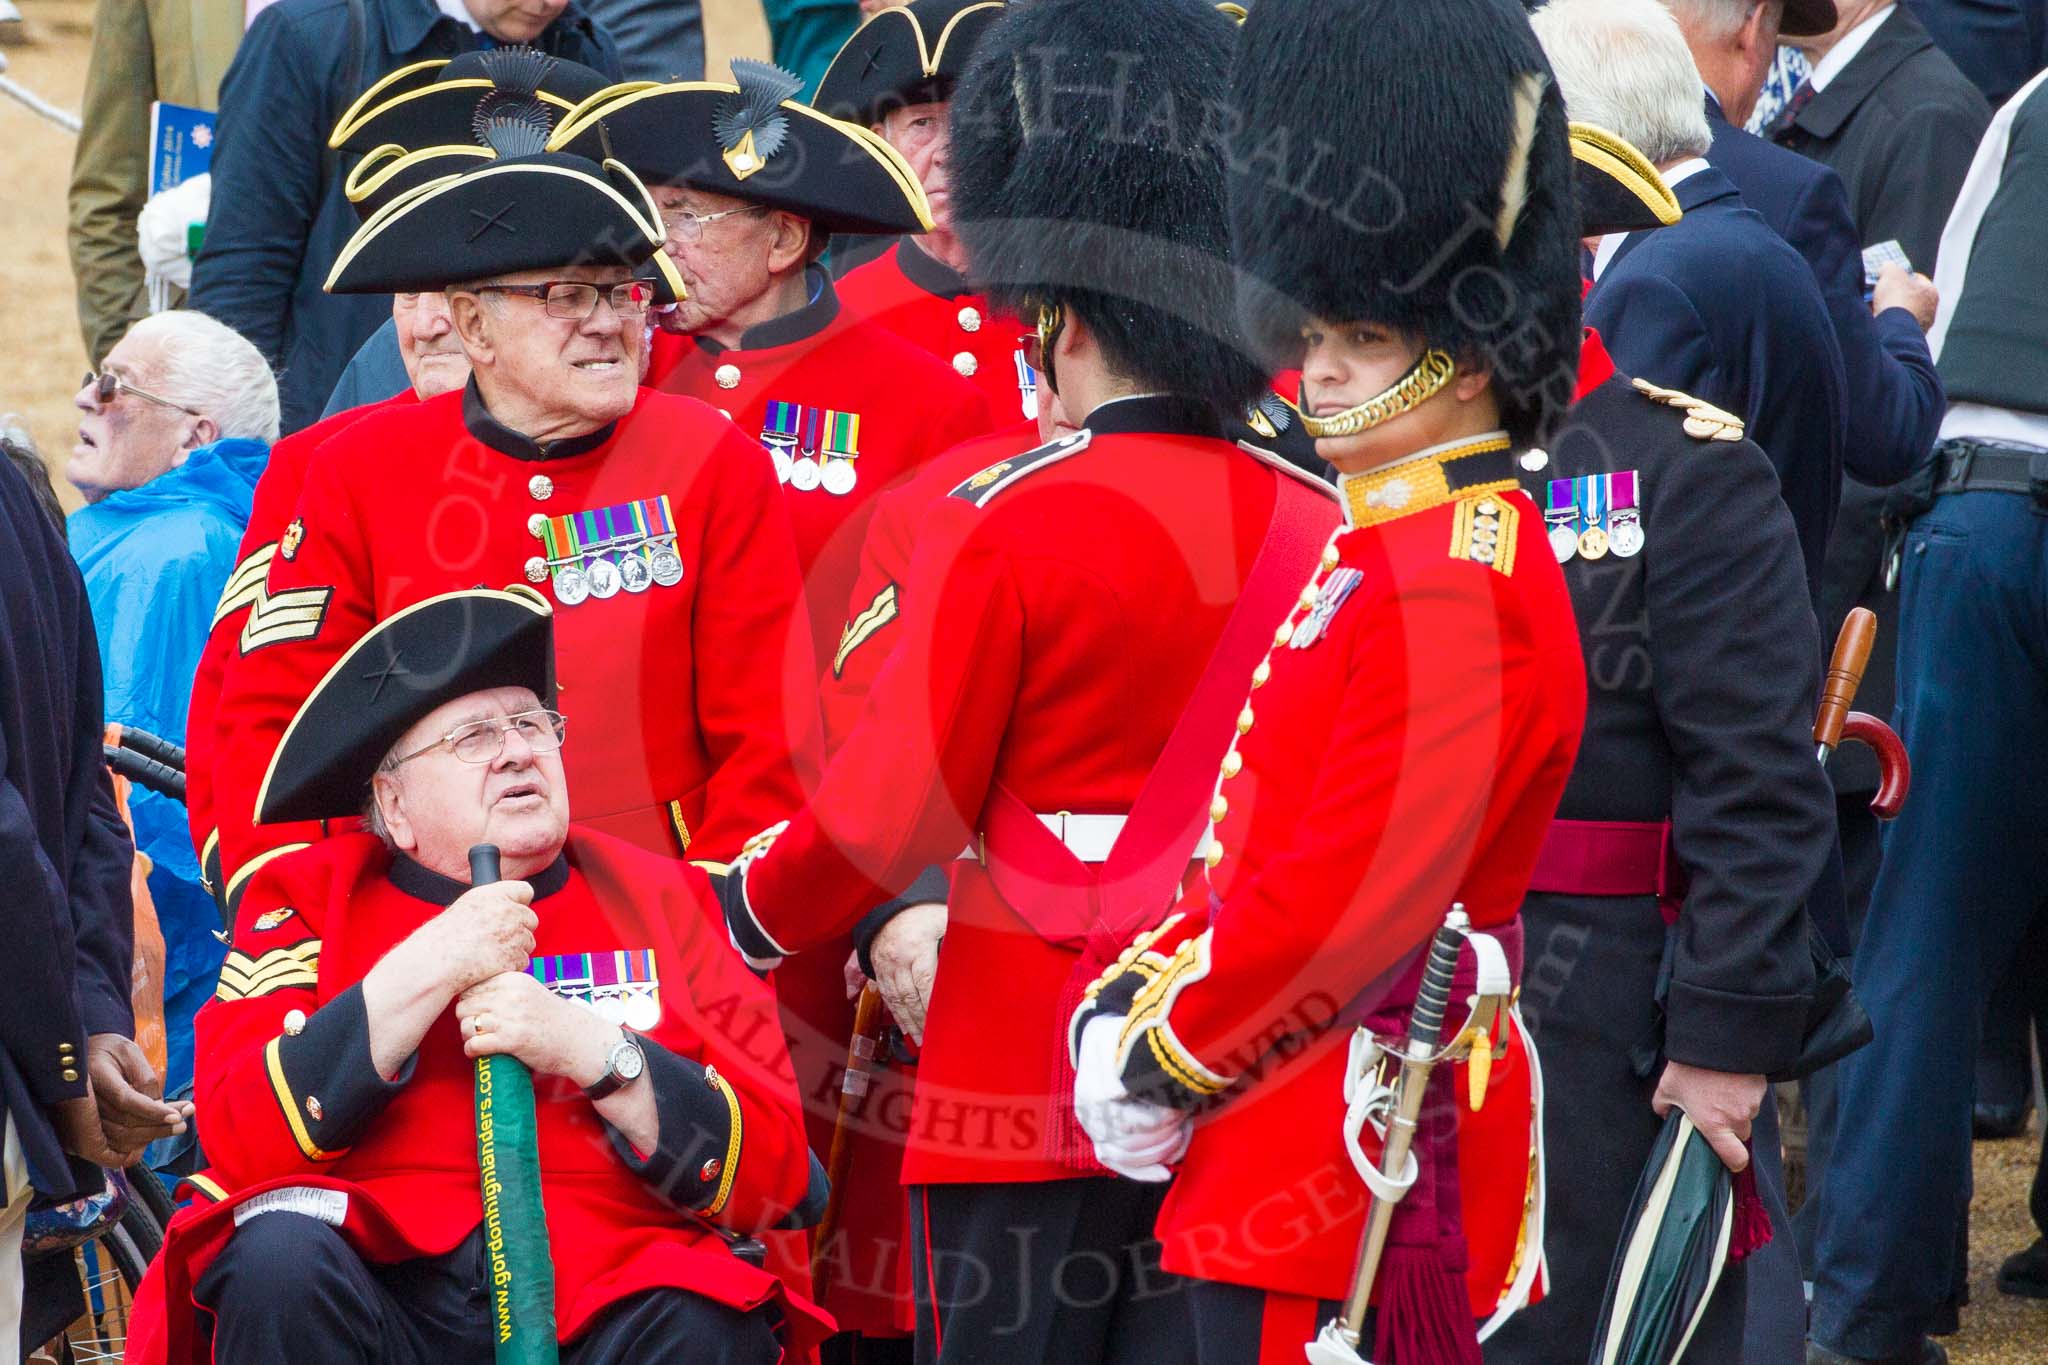 The Colonel's Review 2014.
Horse Guards Parade, Westminster,
London,

United Kingdom,
on 07 June 2014 at 12:14, image #736